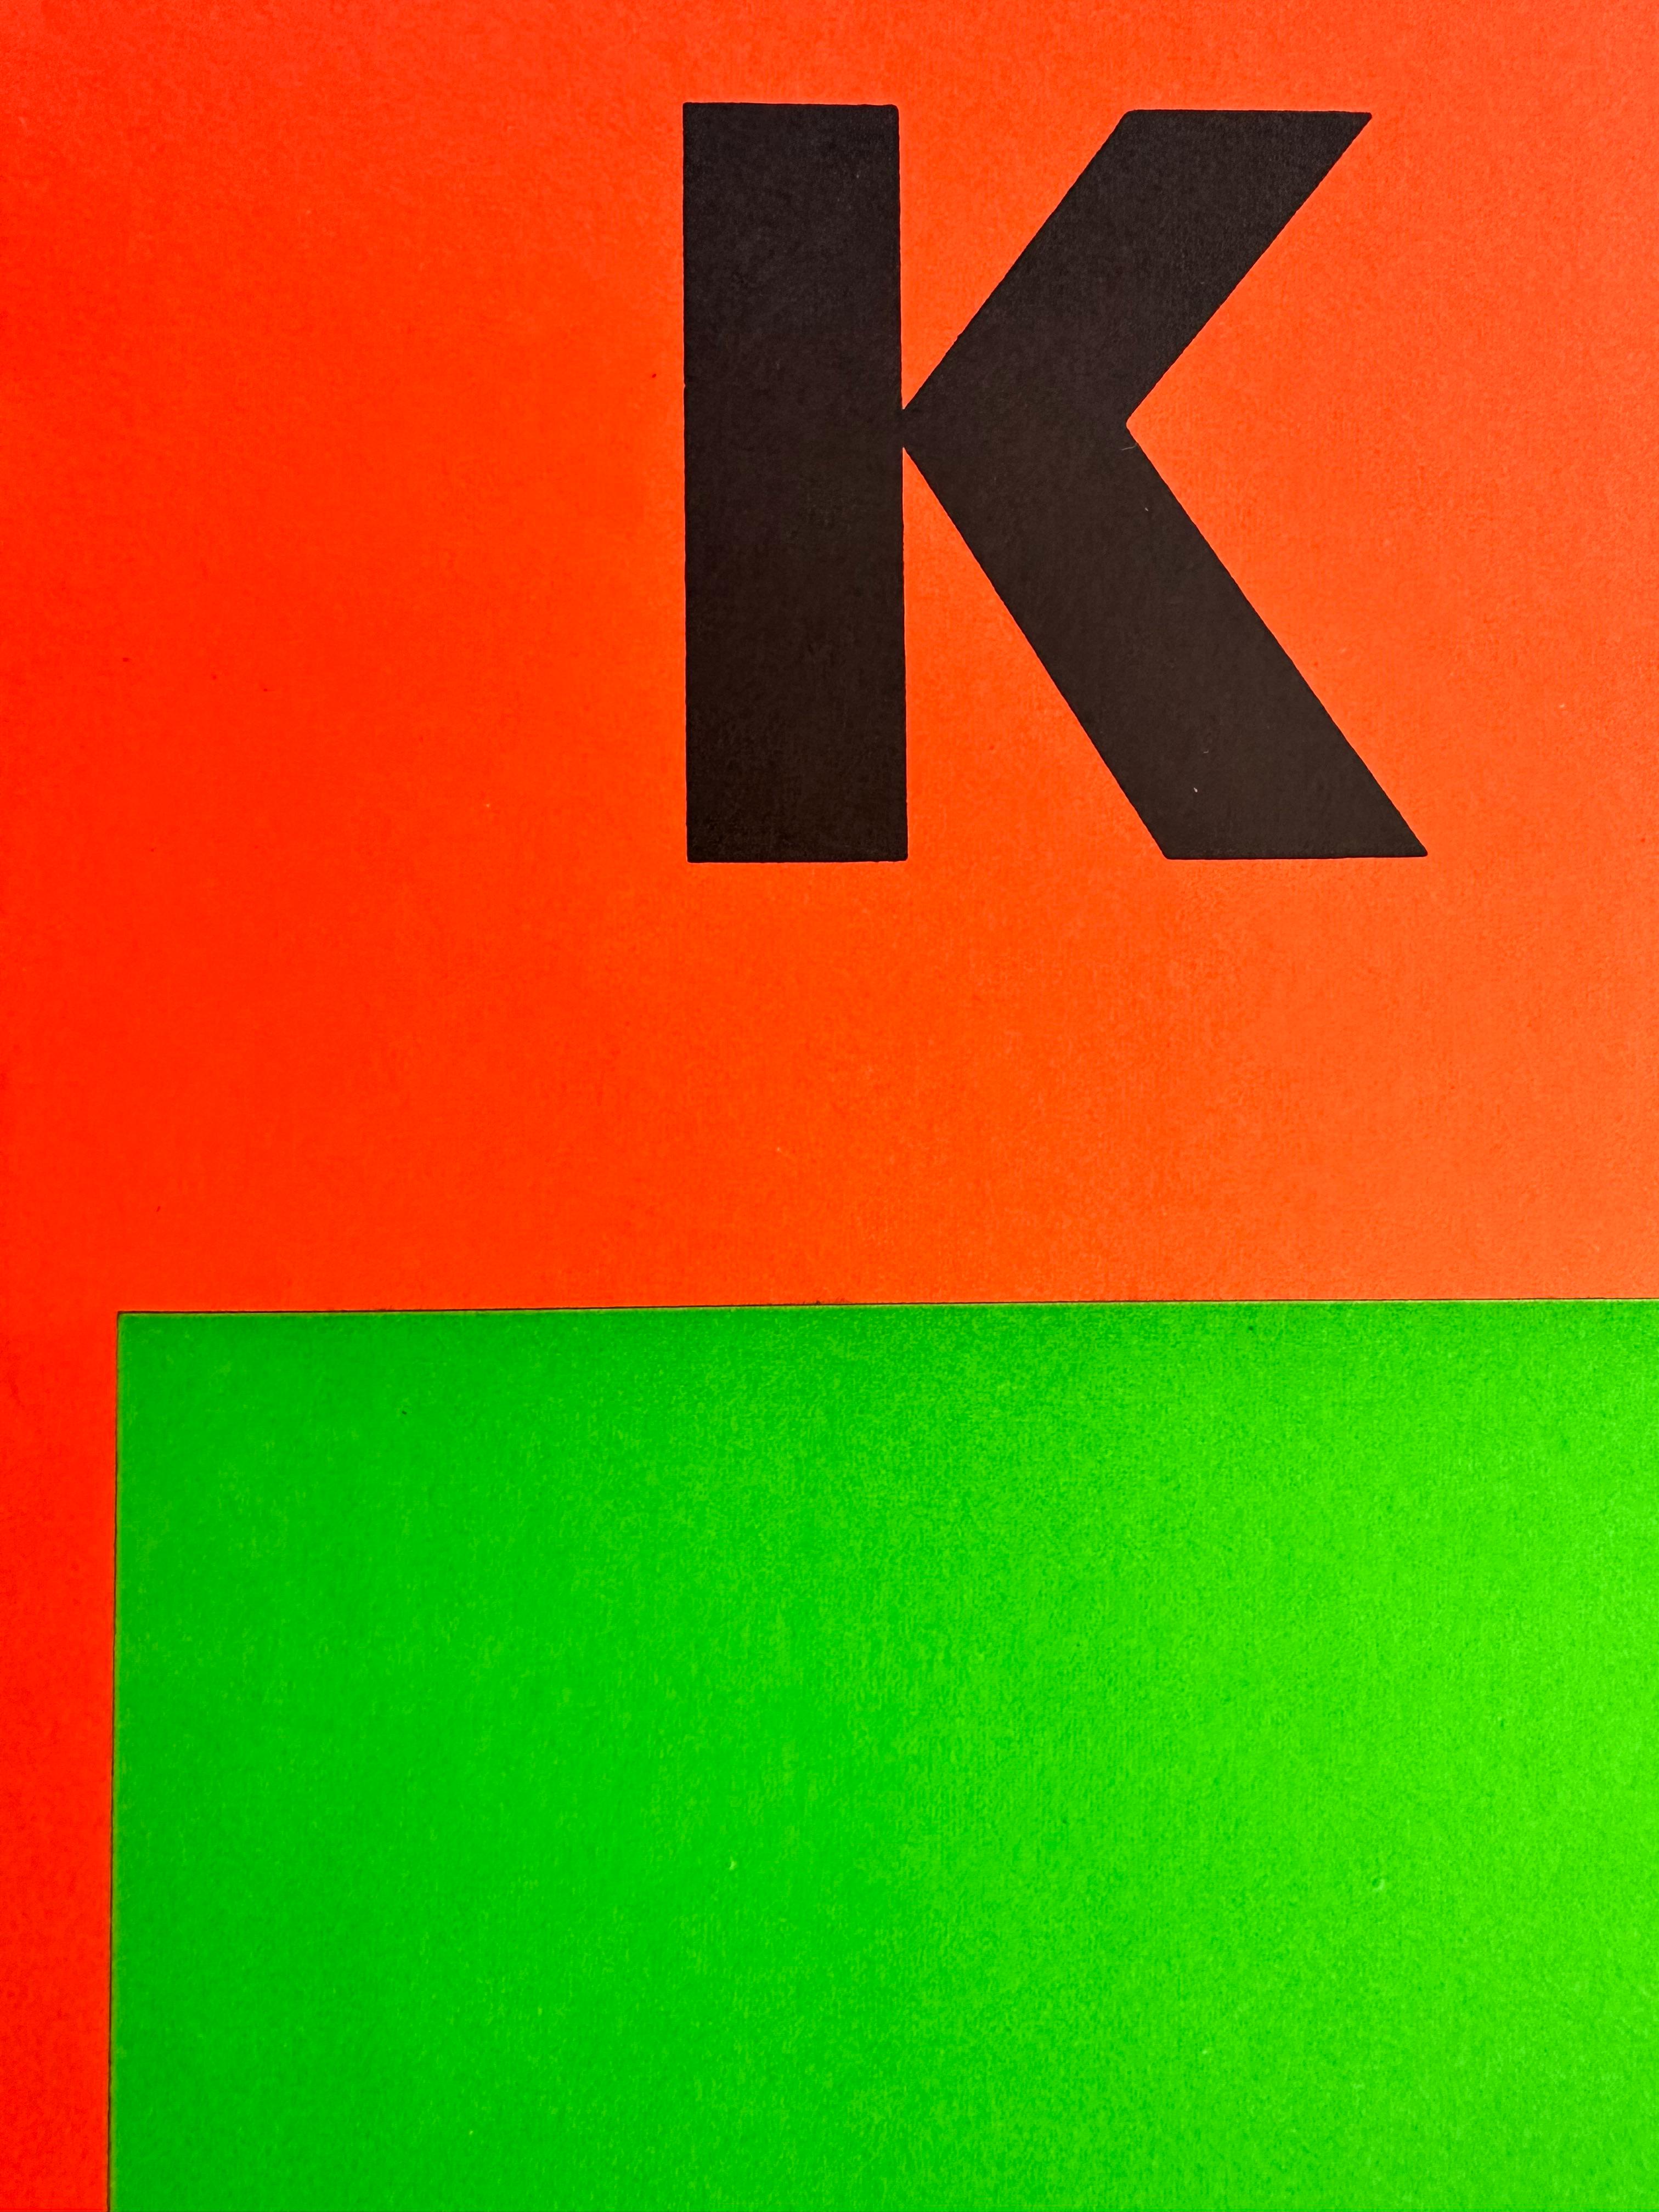 Original Ellsworth Kelly exhibition poster, 1964. Gallerie Maeght. 26 x 20 inches. Lithograph on paper. 

Gentle creasing lower left. Some wear along paper edge, upper left. Very clean, no staining or fading. 

